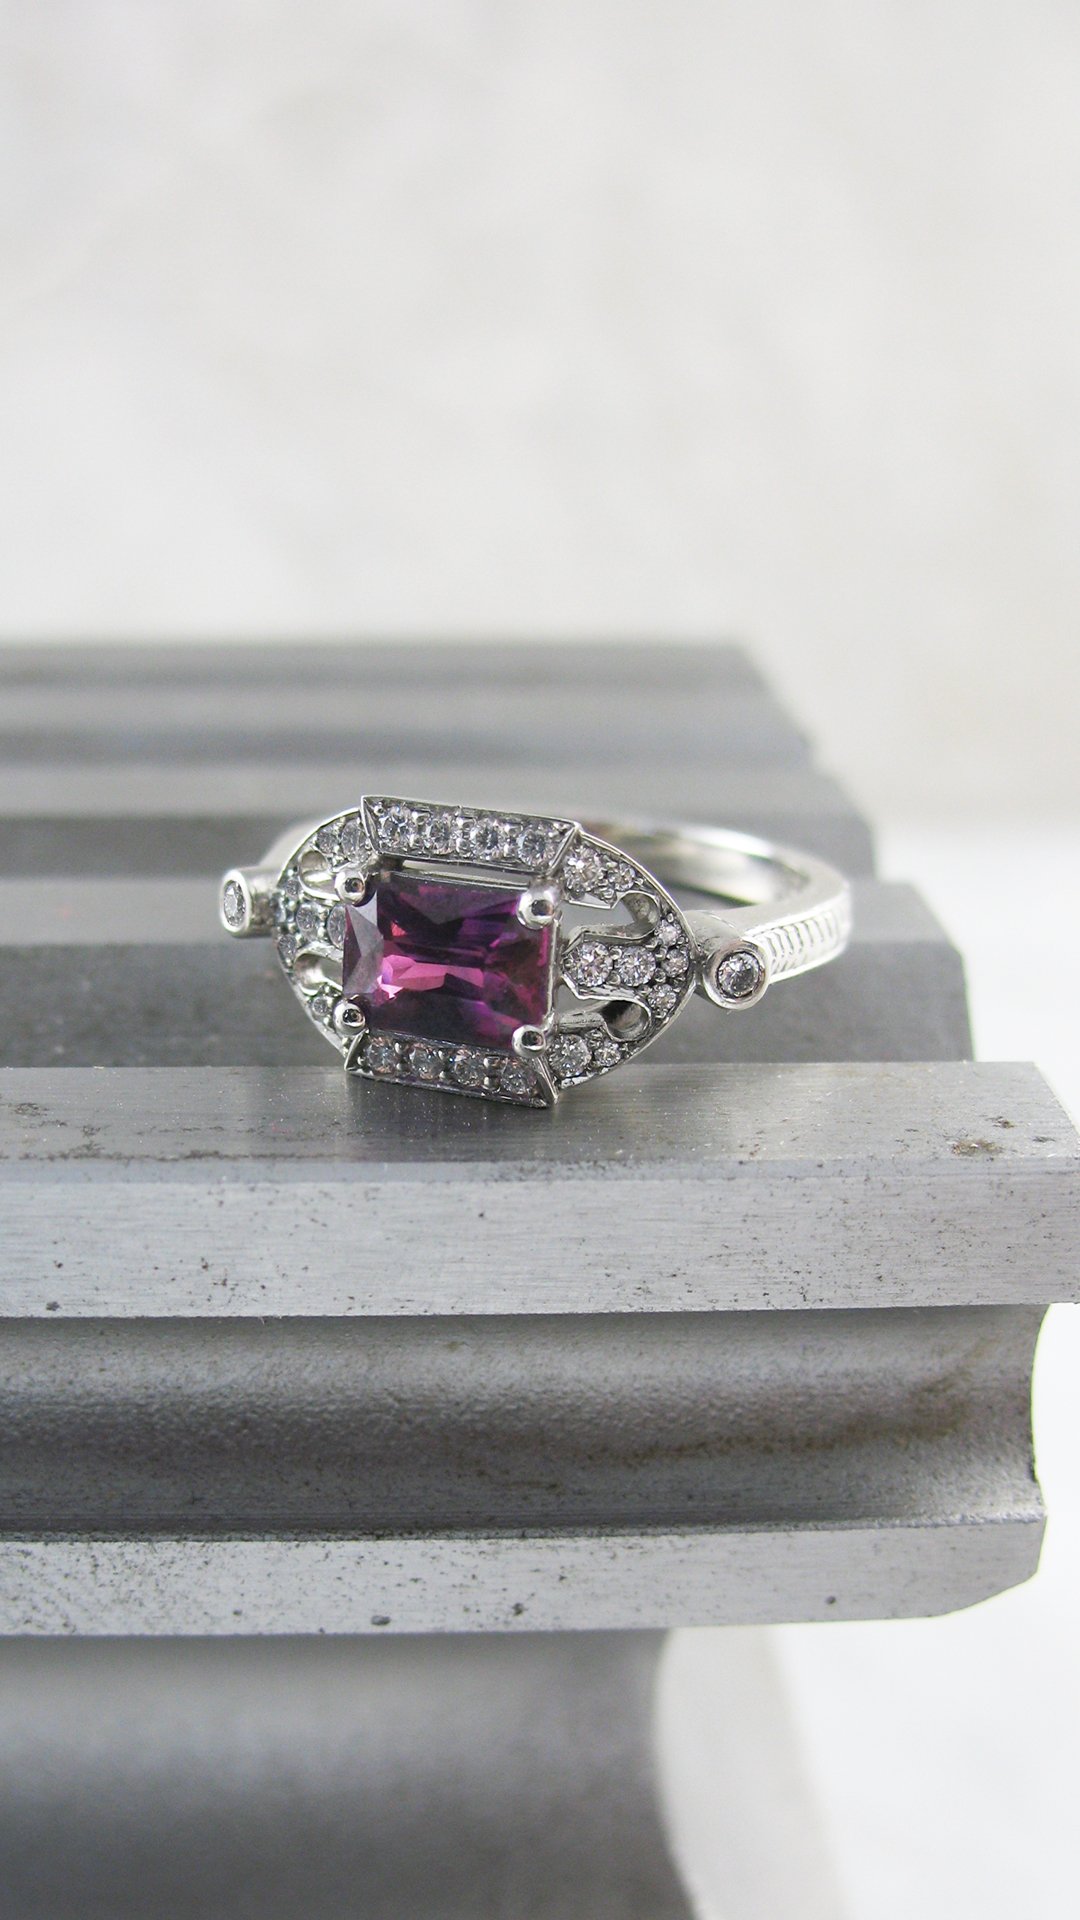 An attractive purple sapphire Art Deco style ring